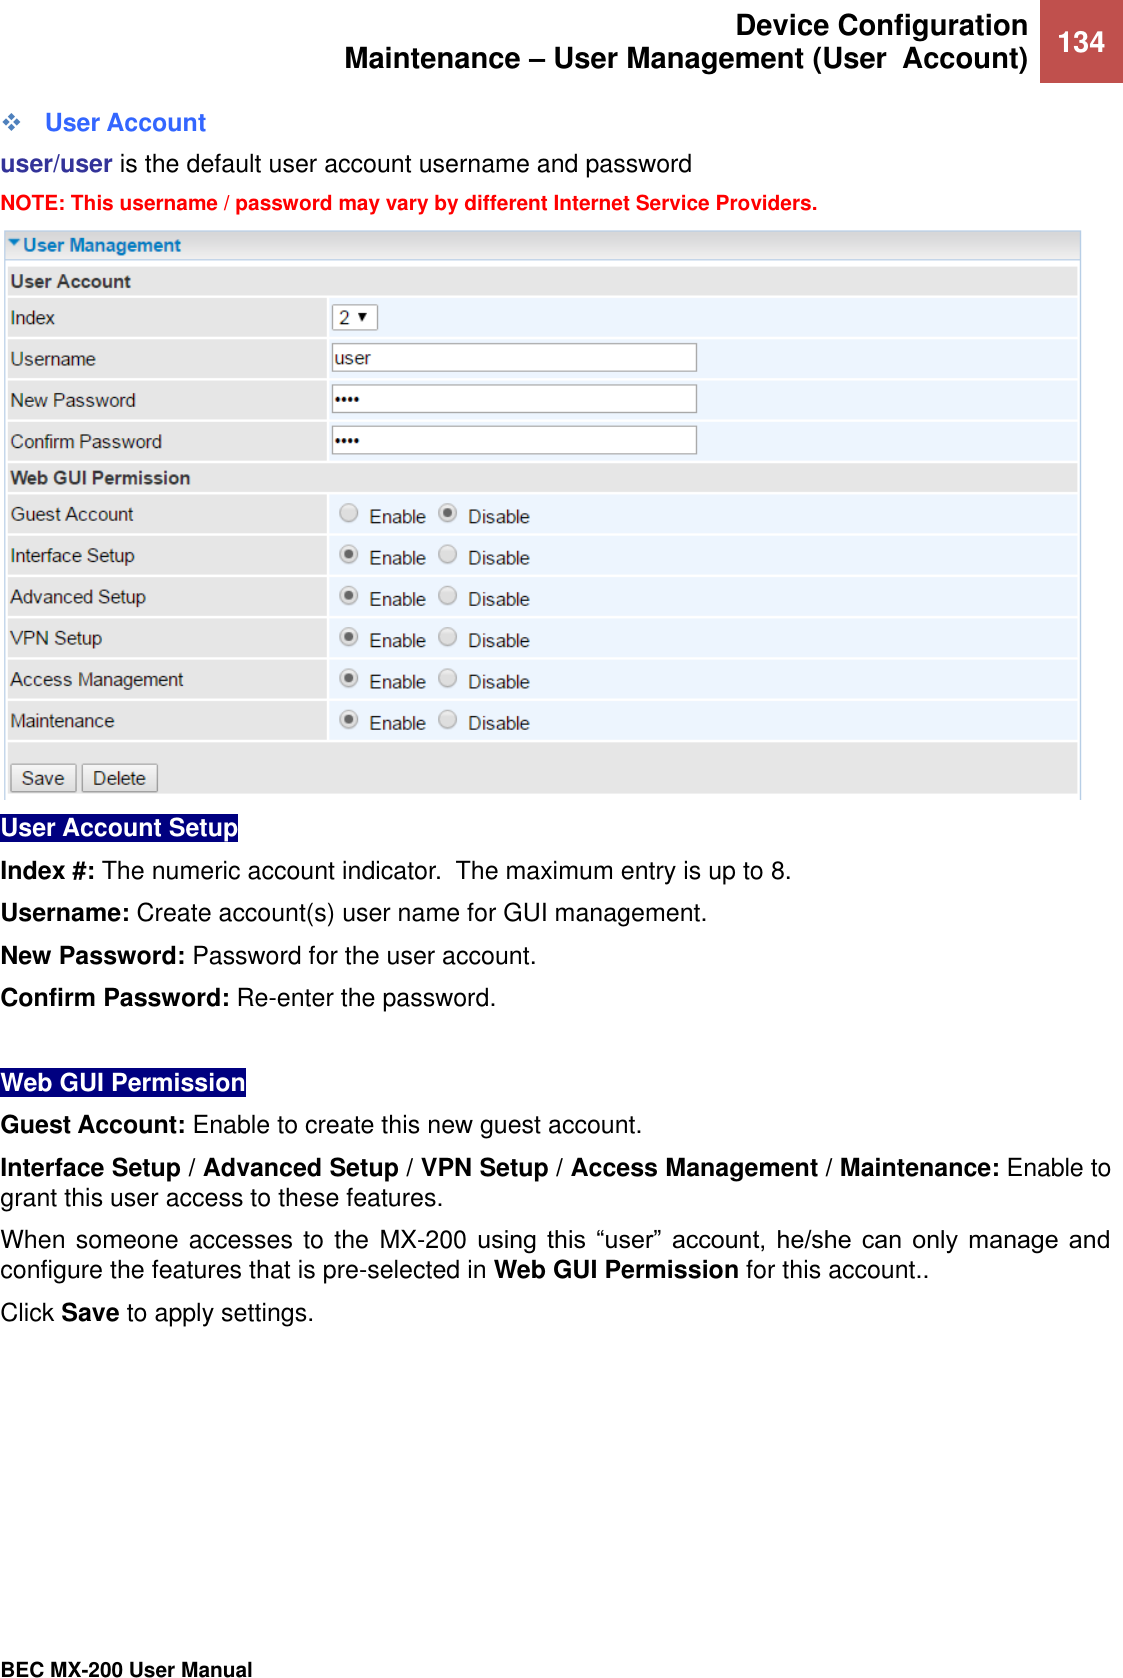  Device Configuration Maintenance – User Management (User  Account) 134   BEC MX-200 User Manual   User Account user/user is the default user account username and password NOTE: This username / password may vary by different Internet Service Providers.  User Account Setup  Index #: The numeric account indicator.  The maximum entry is up to 8. Username: Create account(s) user name for GUI management.  New Password: Password for the user account.  Confirm Password: Re-enter the password.  Web GUI Permission  Guest Account: Enable to create this new guest account. Interface Setup / Advanced Setup / VPN Setup / Access Management / Maintenance: Enable to grant this user access to these features. When someone accesses to the MX-200 using  this  “user”  account,  he/she  can  only  manage  and configure the features that is pre-selected in Web GUI Permission for this account.. Click Save to apply settings.    